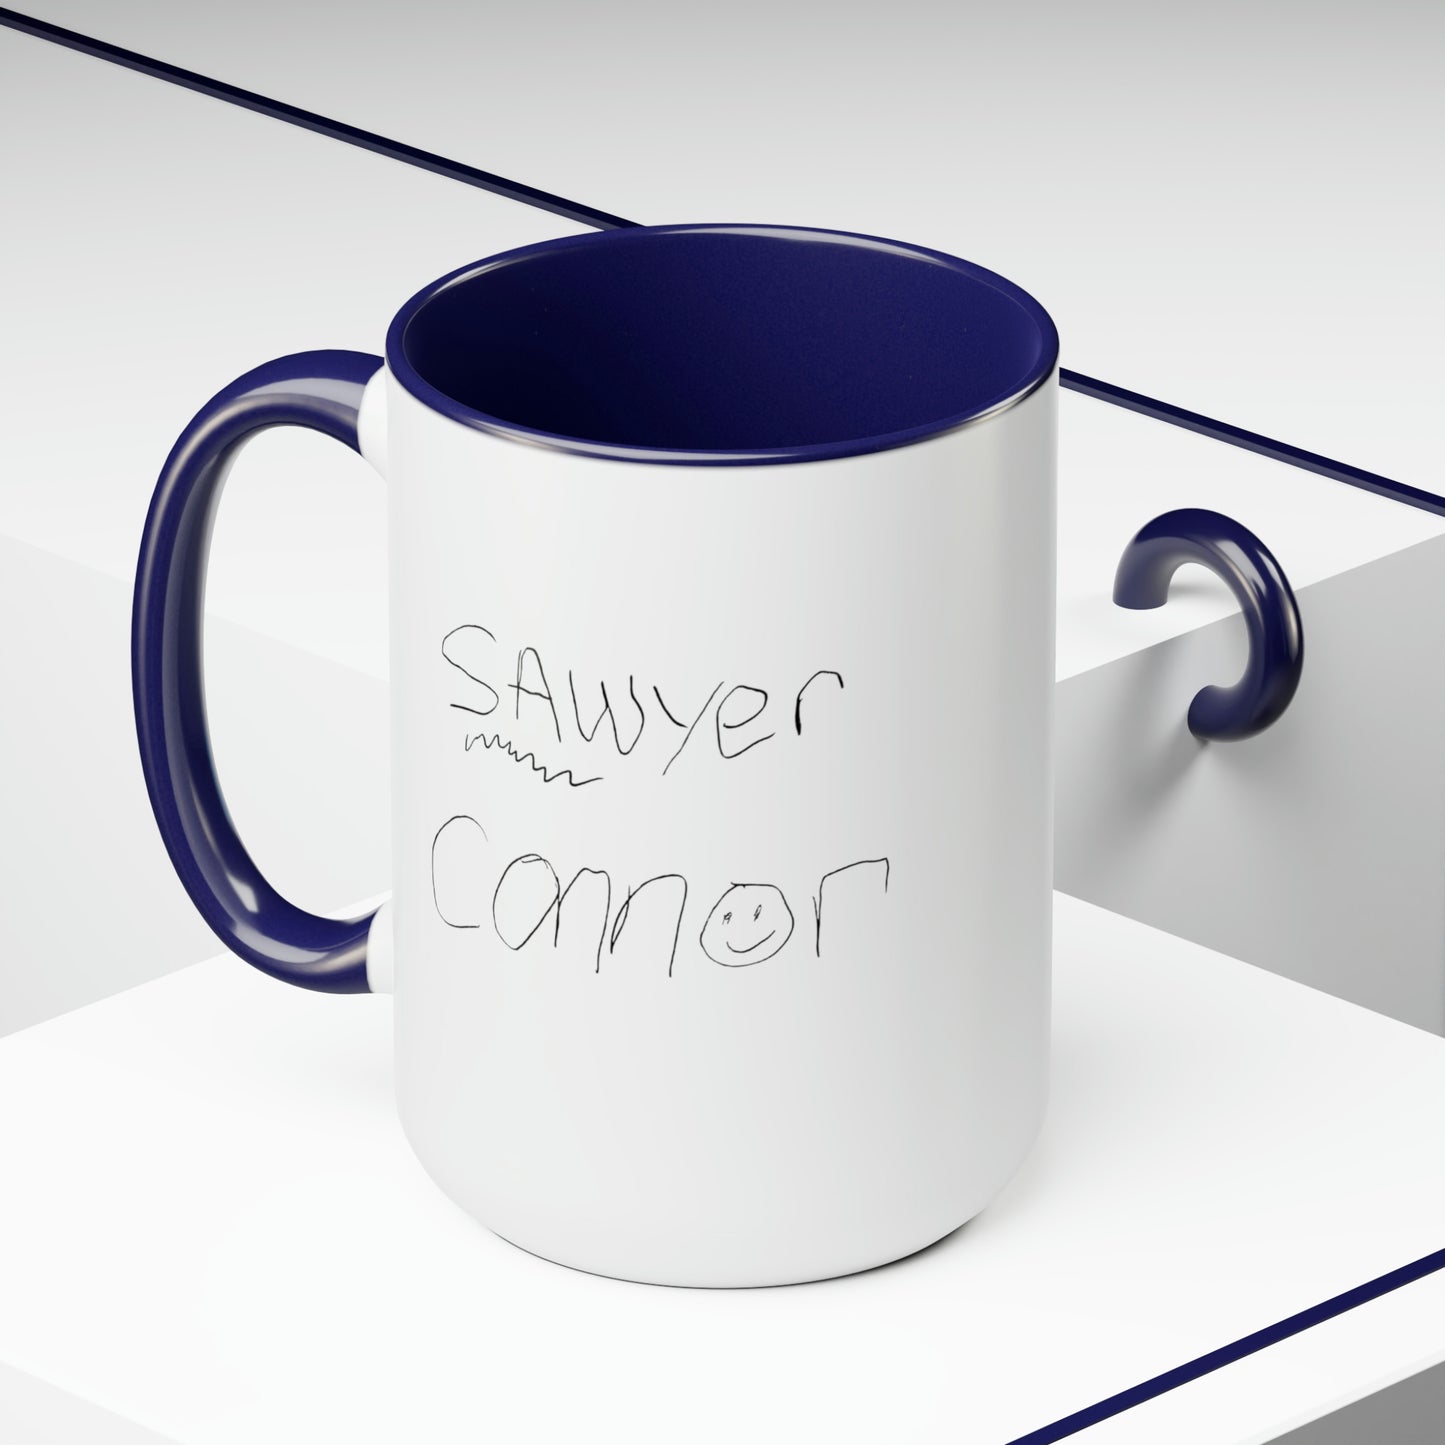 Special Design Connor and Sawyer Stick Figure Two-Tone Coffee Mugs, 15oz